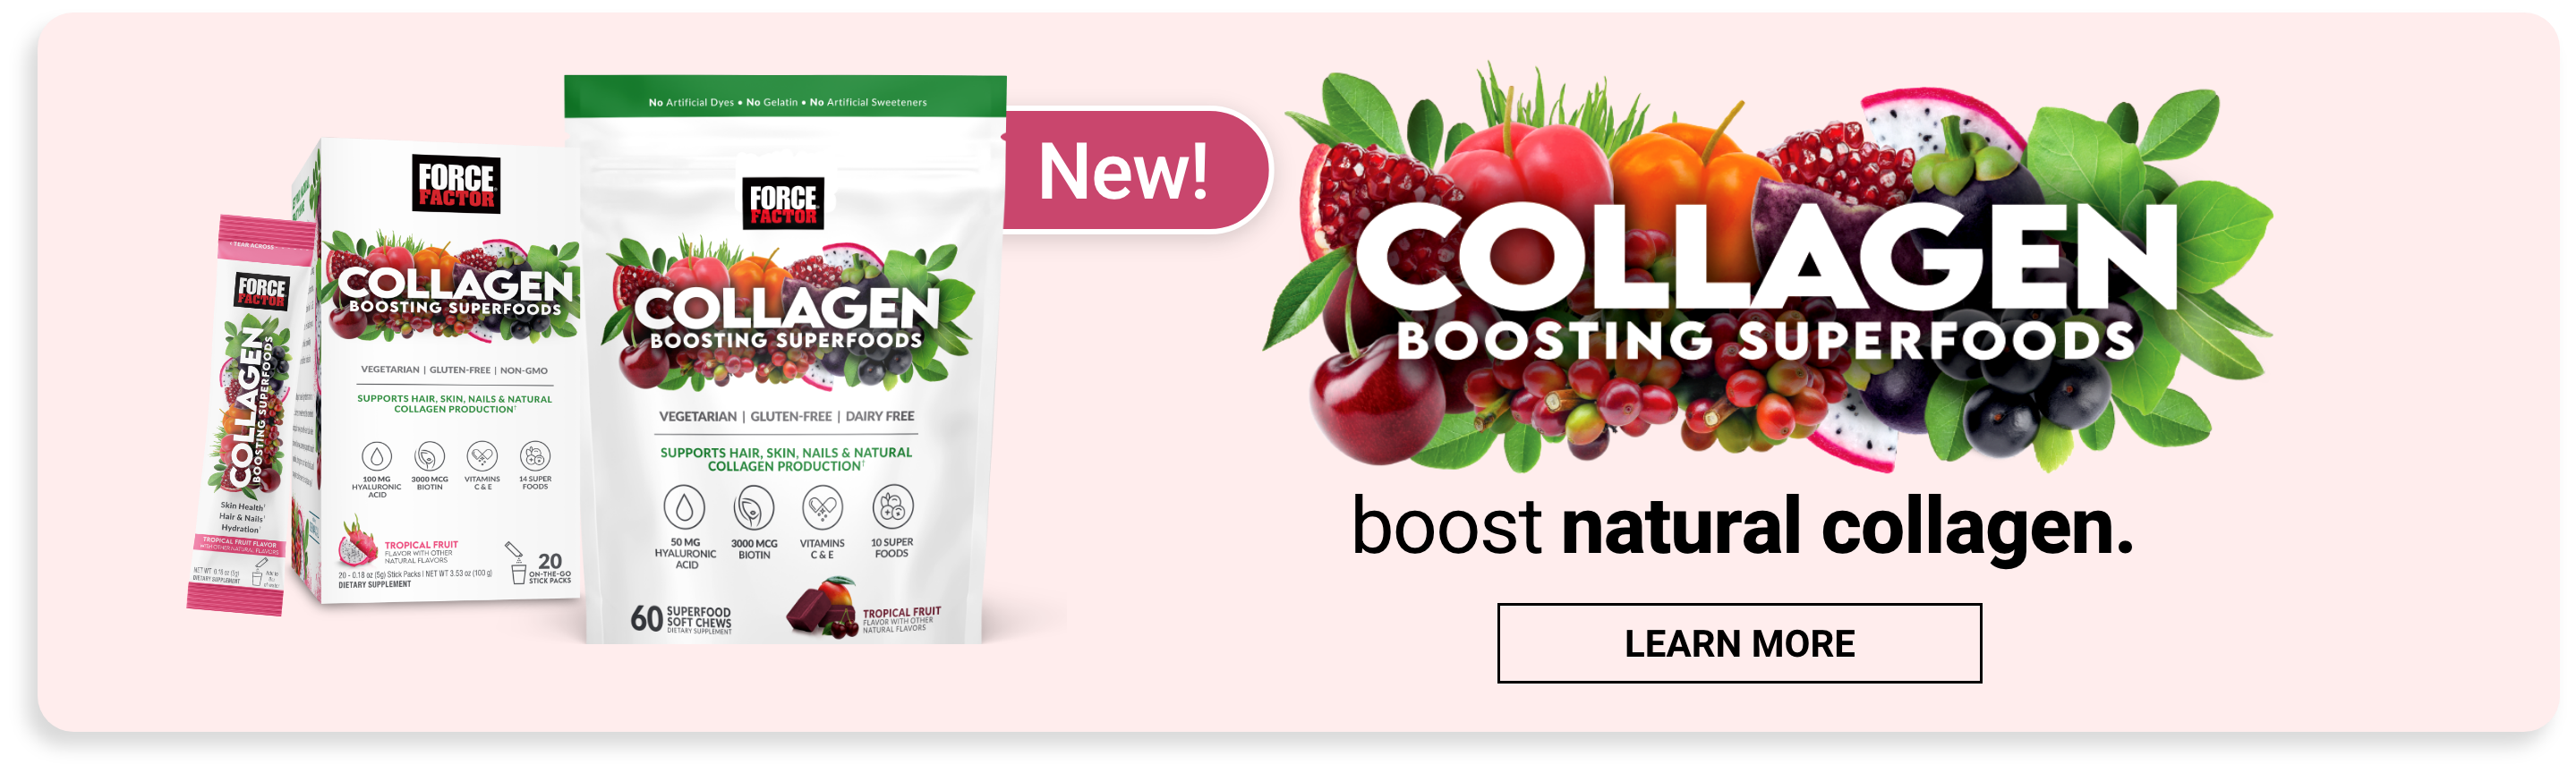 New! Collagen Boosting Superfoods - Learn More